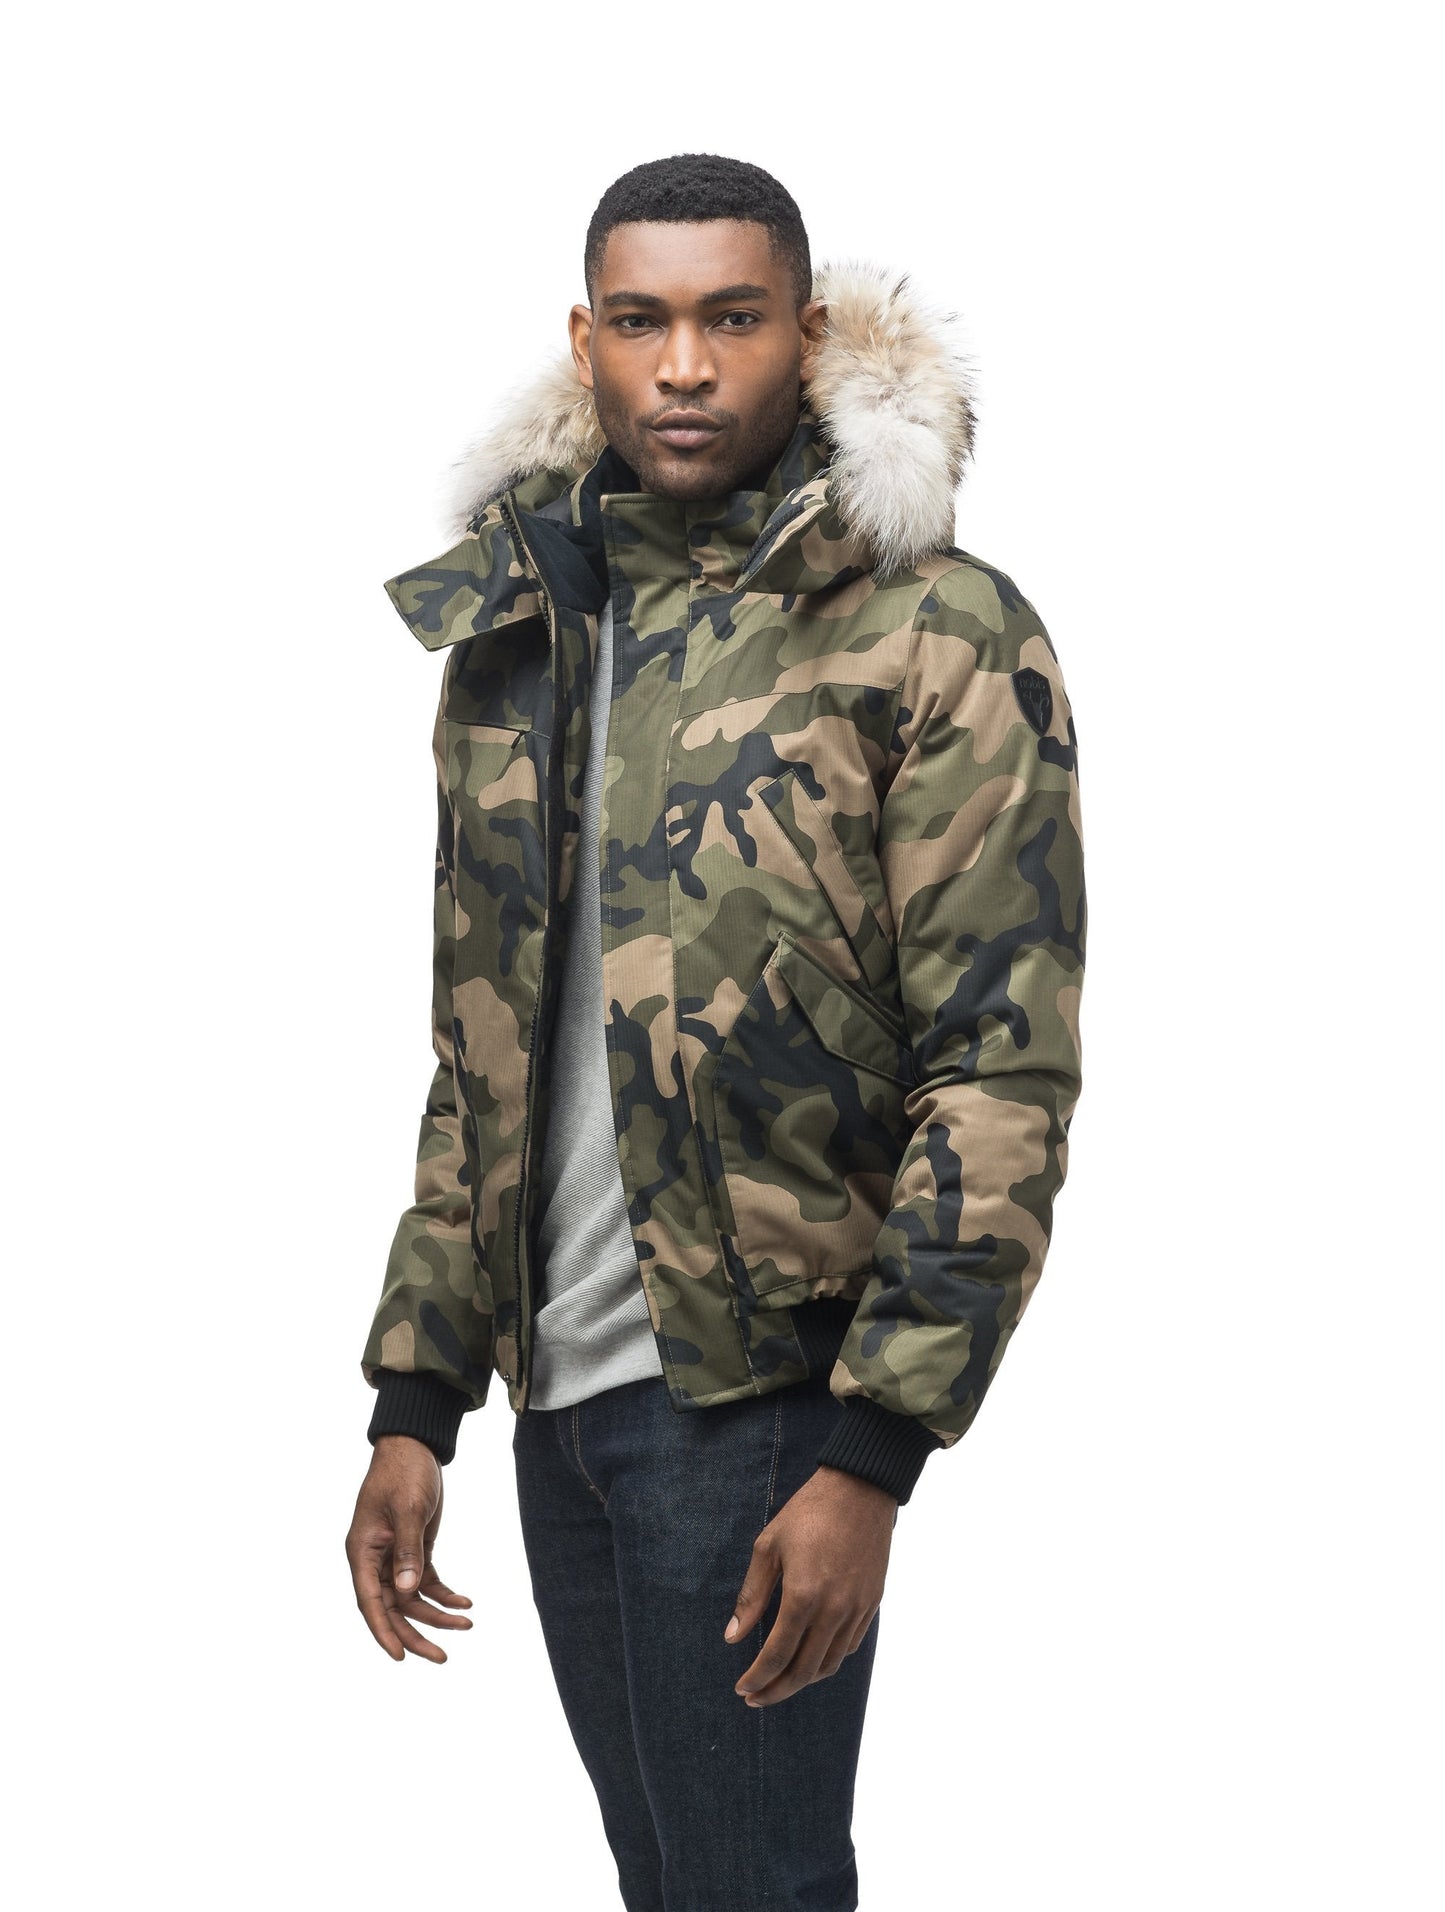 Men's classic down filled bomber jacket with a down filledÂ hood that features a removable coyote fur trim and concealed moldable framing wire in Camo